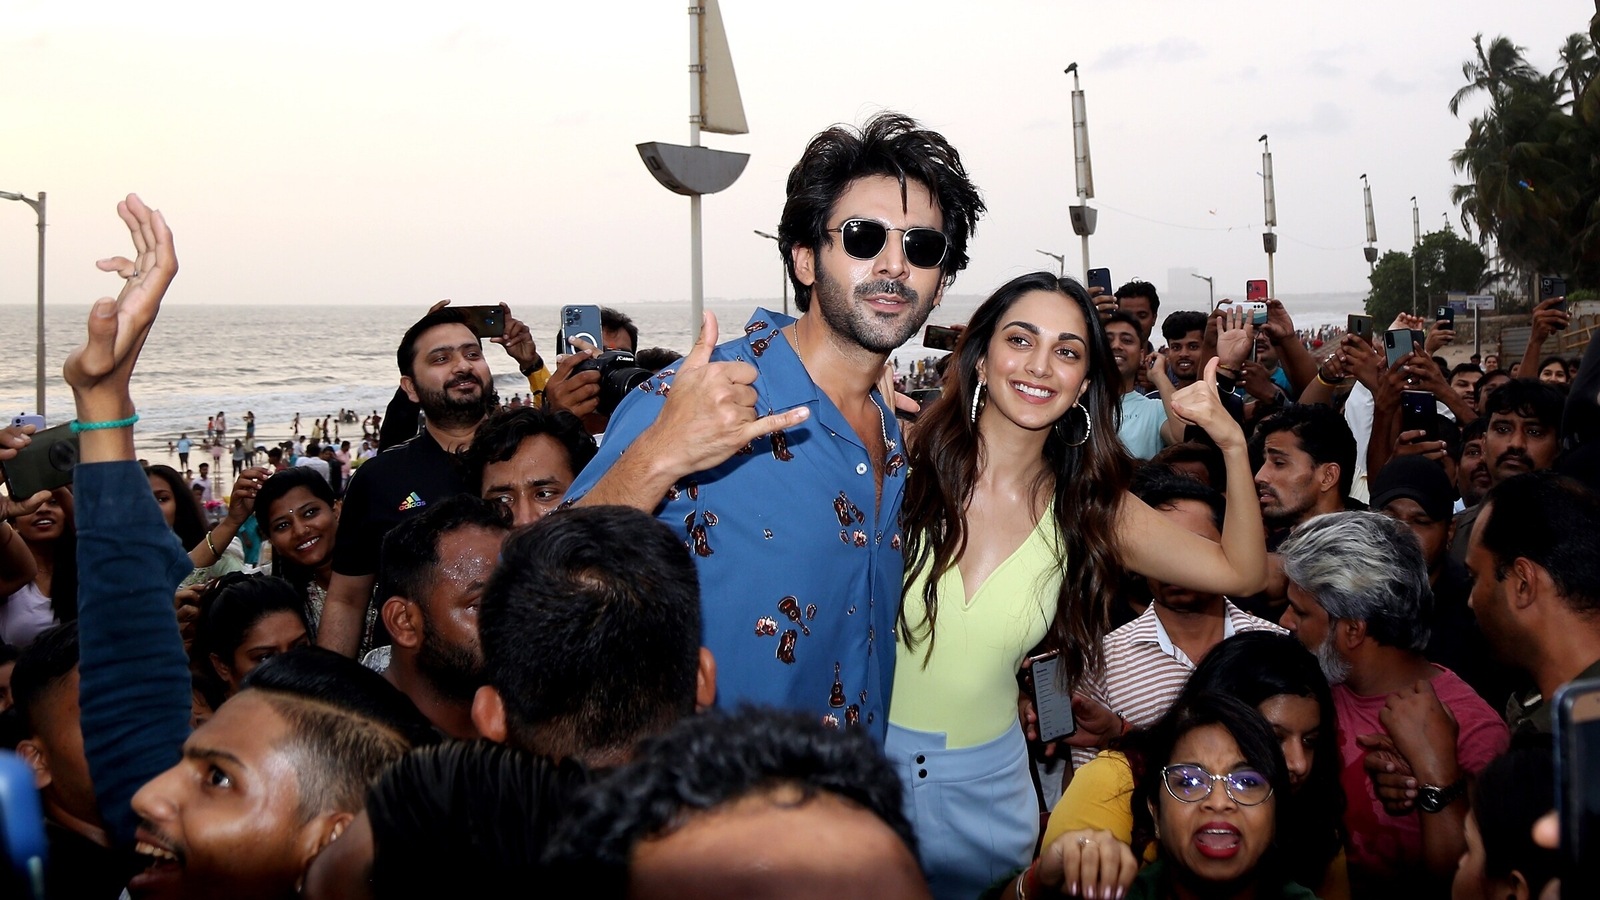 Kiara Advani confesses she tried to steal Kartik Aaryan’s fans: ‘He may not notice who is crying for him, I do’